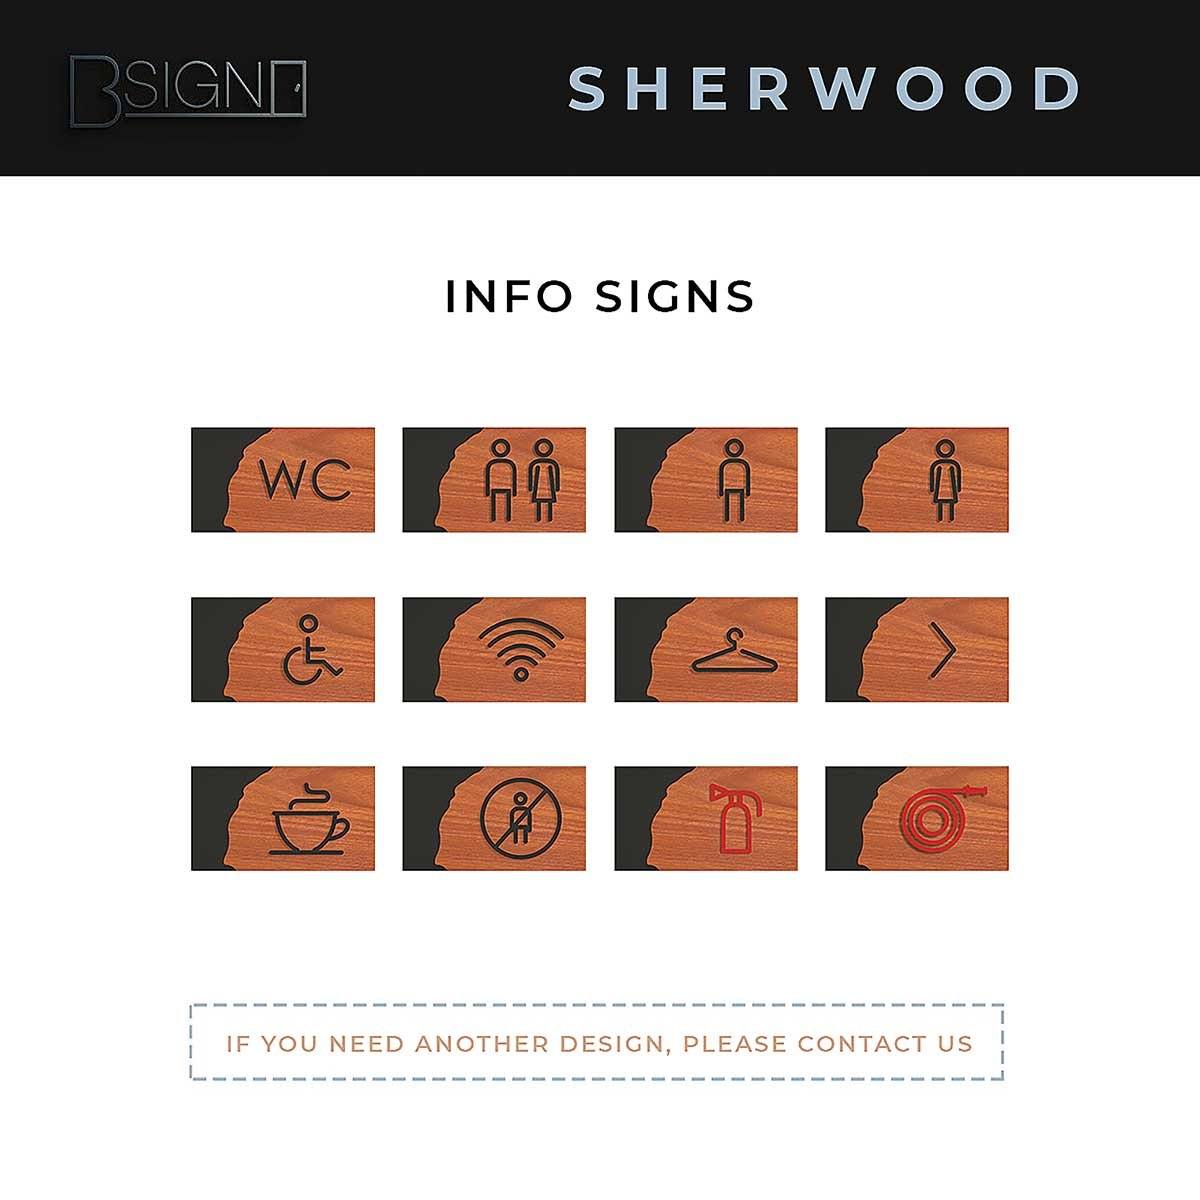 Wooden Fire Hydrant Sign "Sherwood" Design